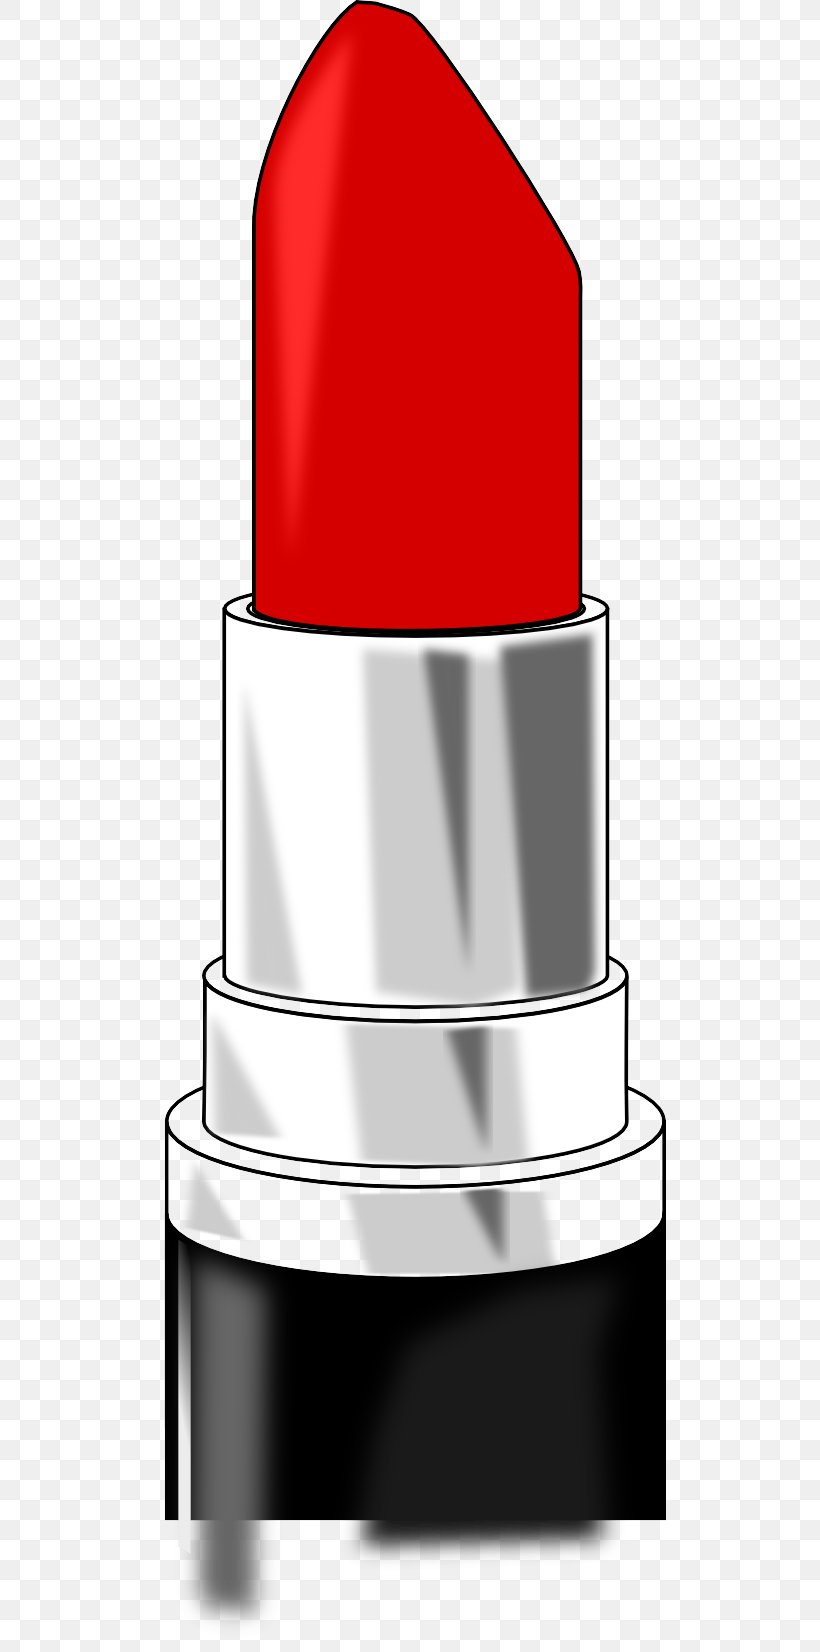 Lipstick Cylinder Cosmetics Clip Art Material Property, PNG, 512x1652px, Lipstick, Cosmetics, Cylinder, Material Property Download Free